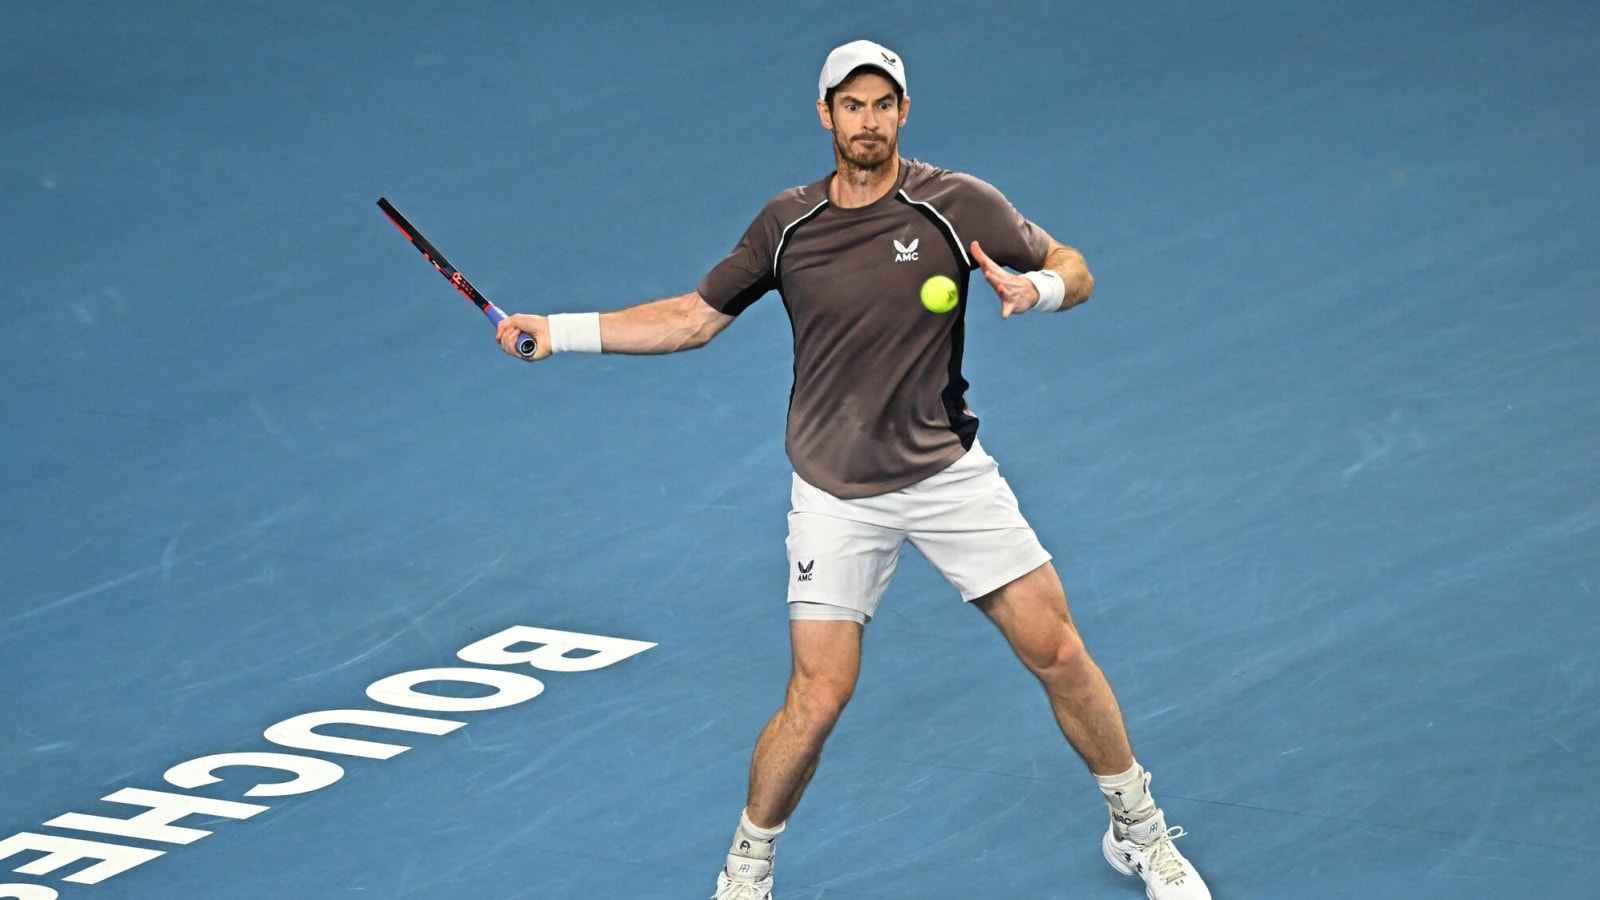 'I can’t win a single match,' Andy Murray is on his path to the Grand Slam ‘level’, despite initial upsets this season